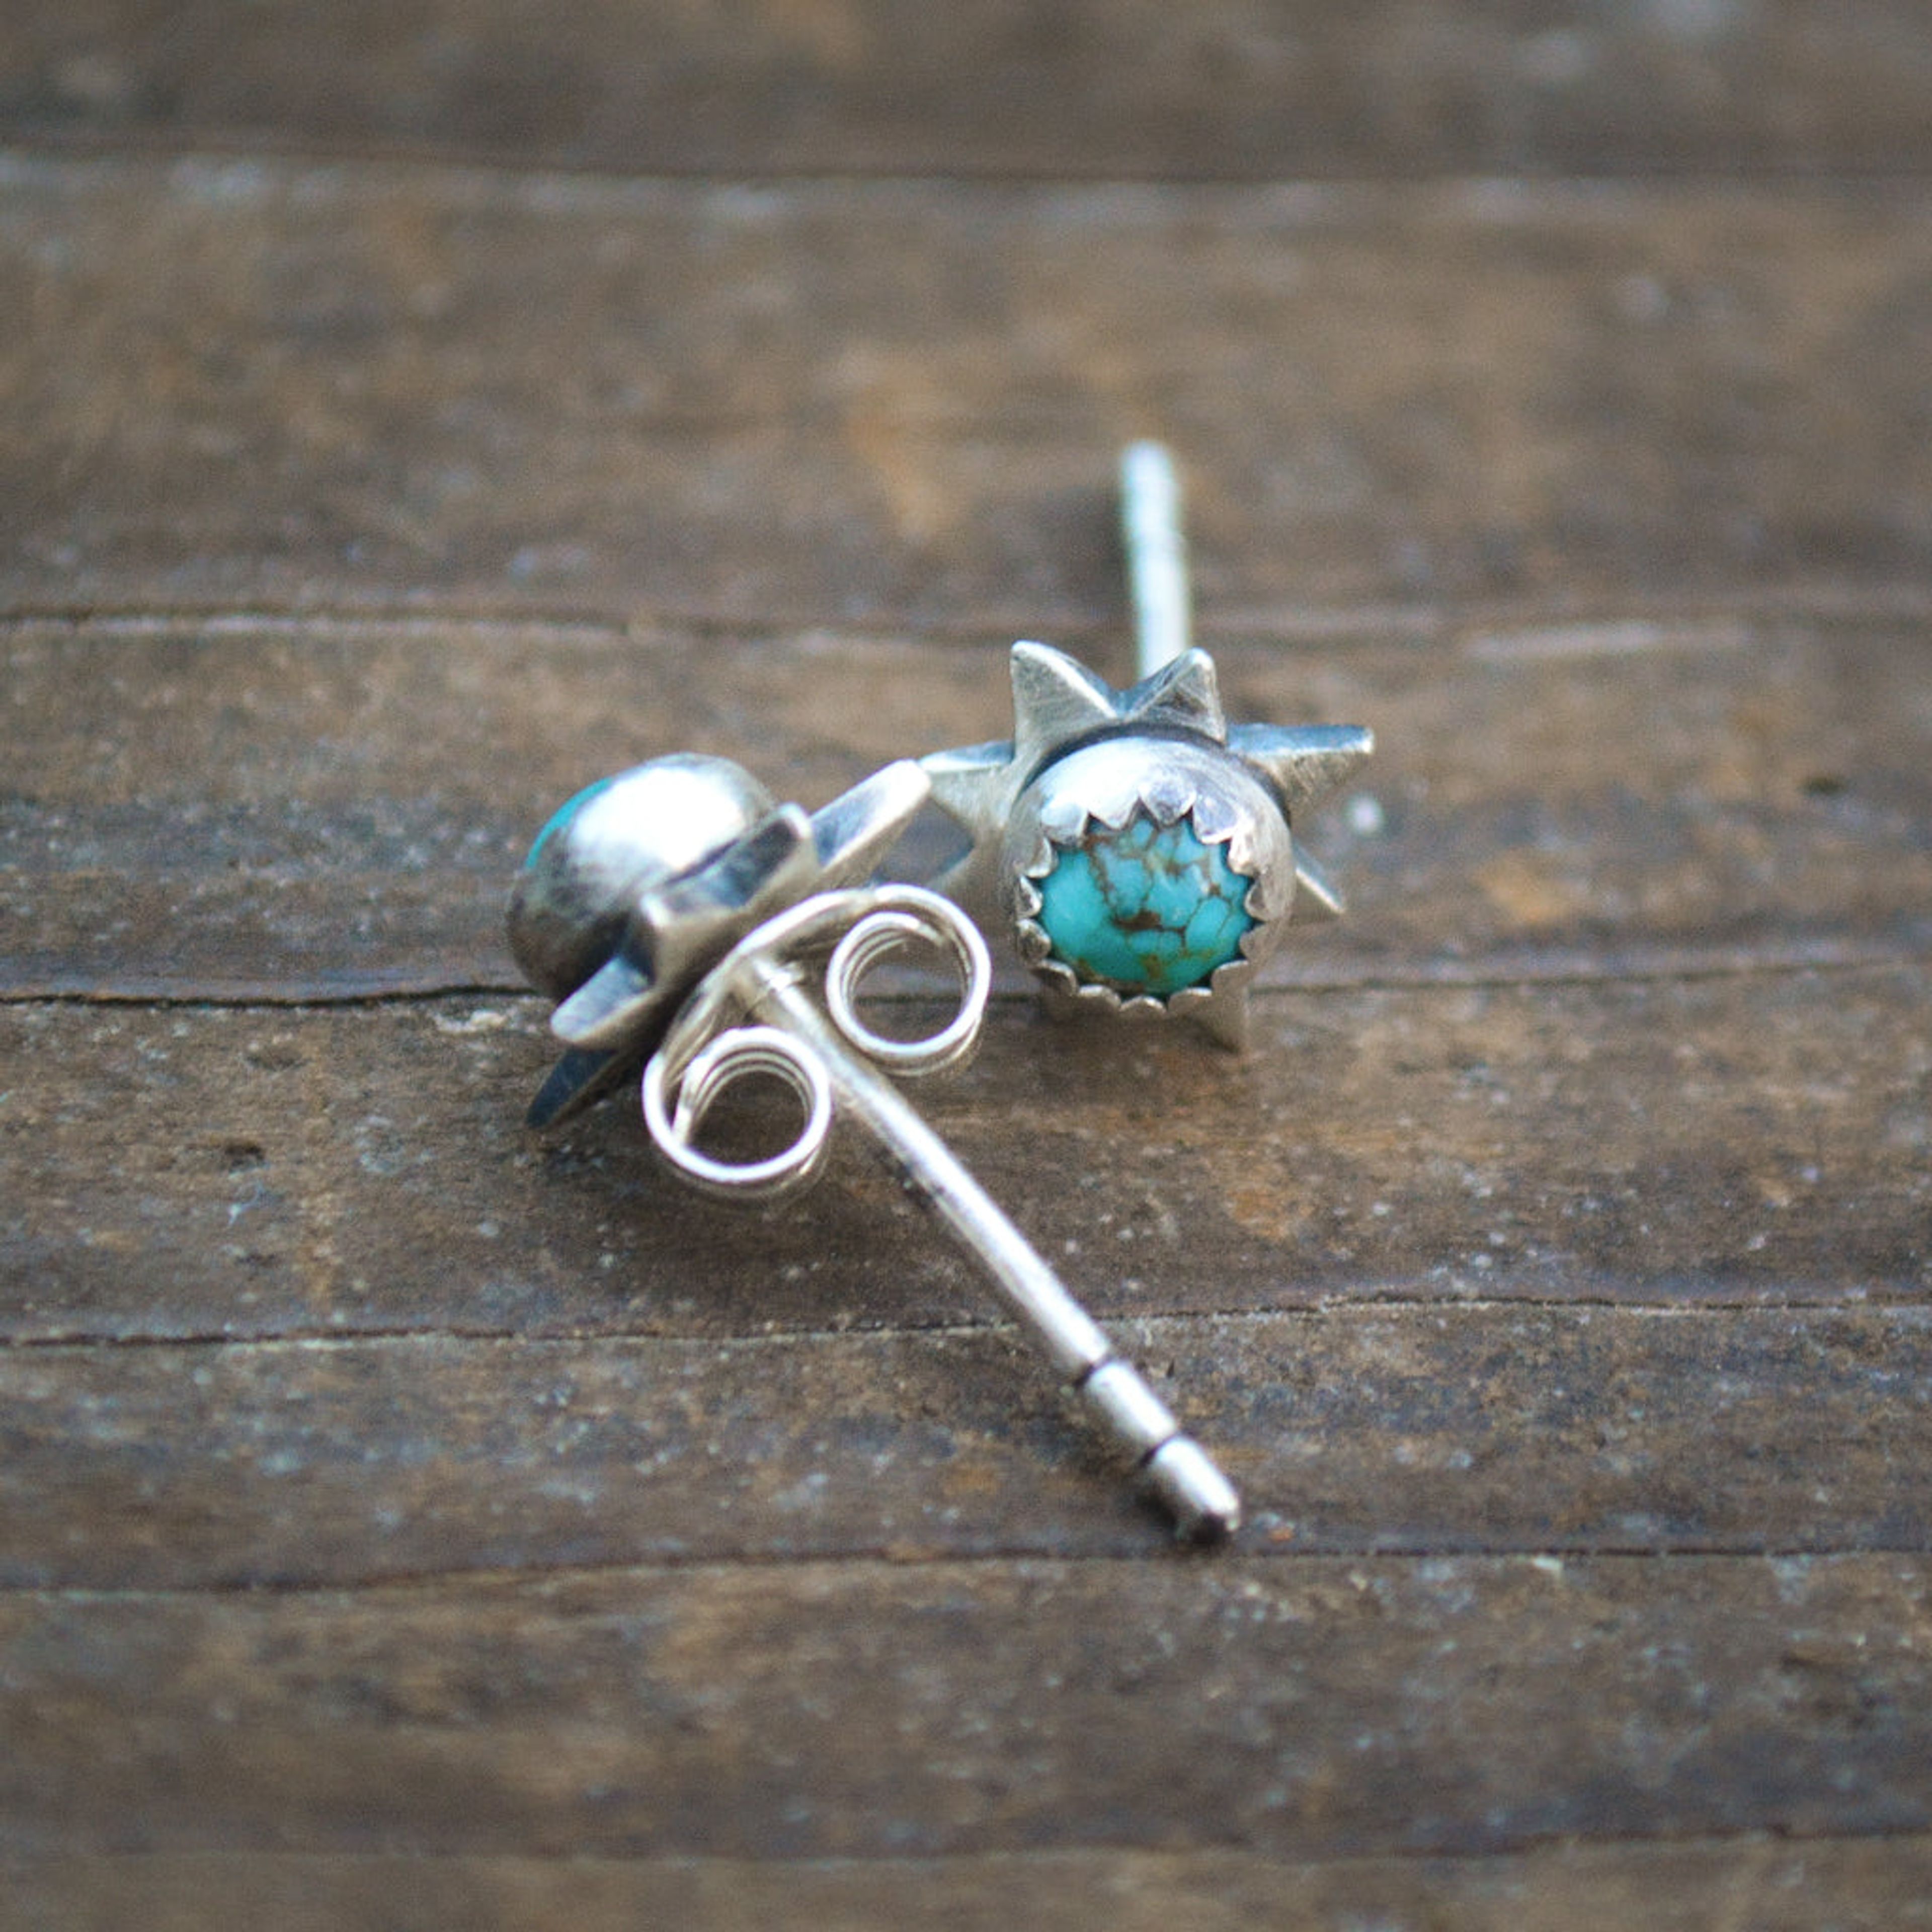 Celestial Studs - Natural Turquoise Earrings